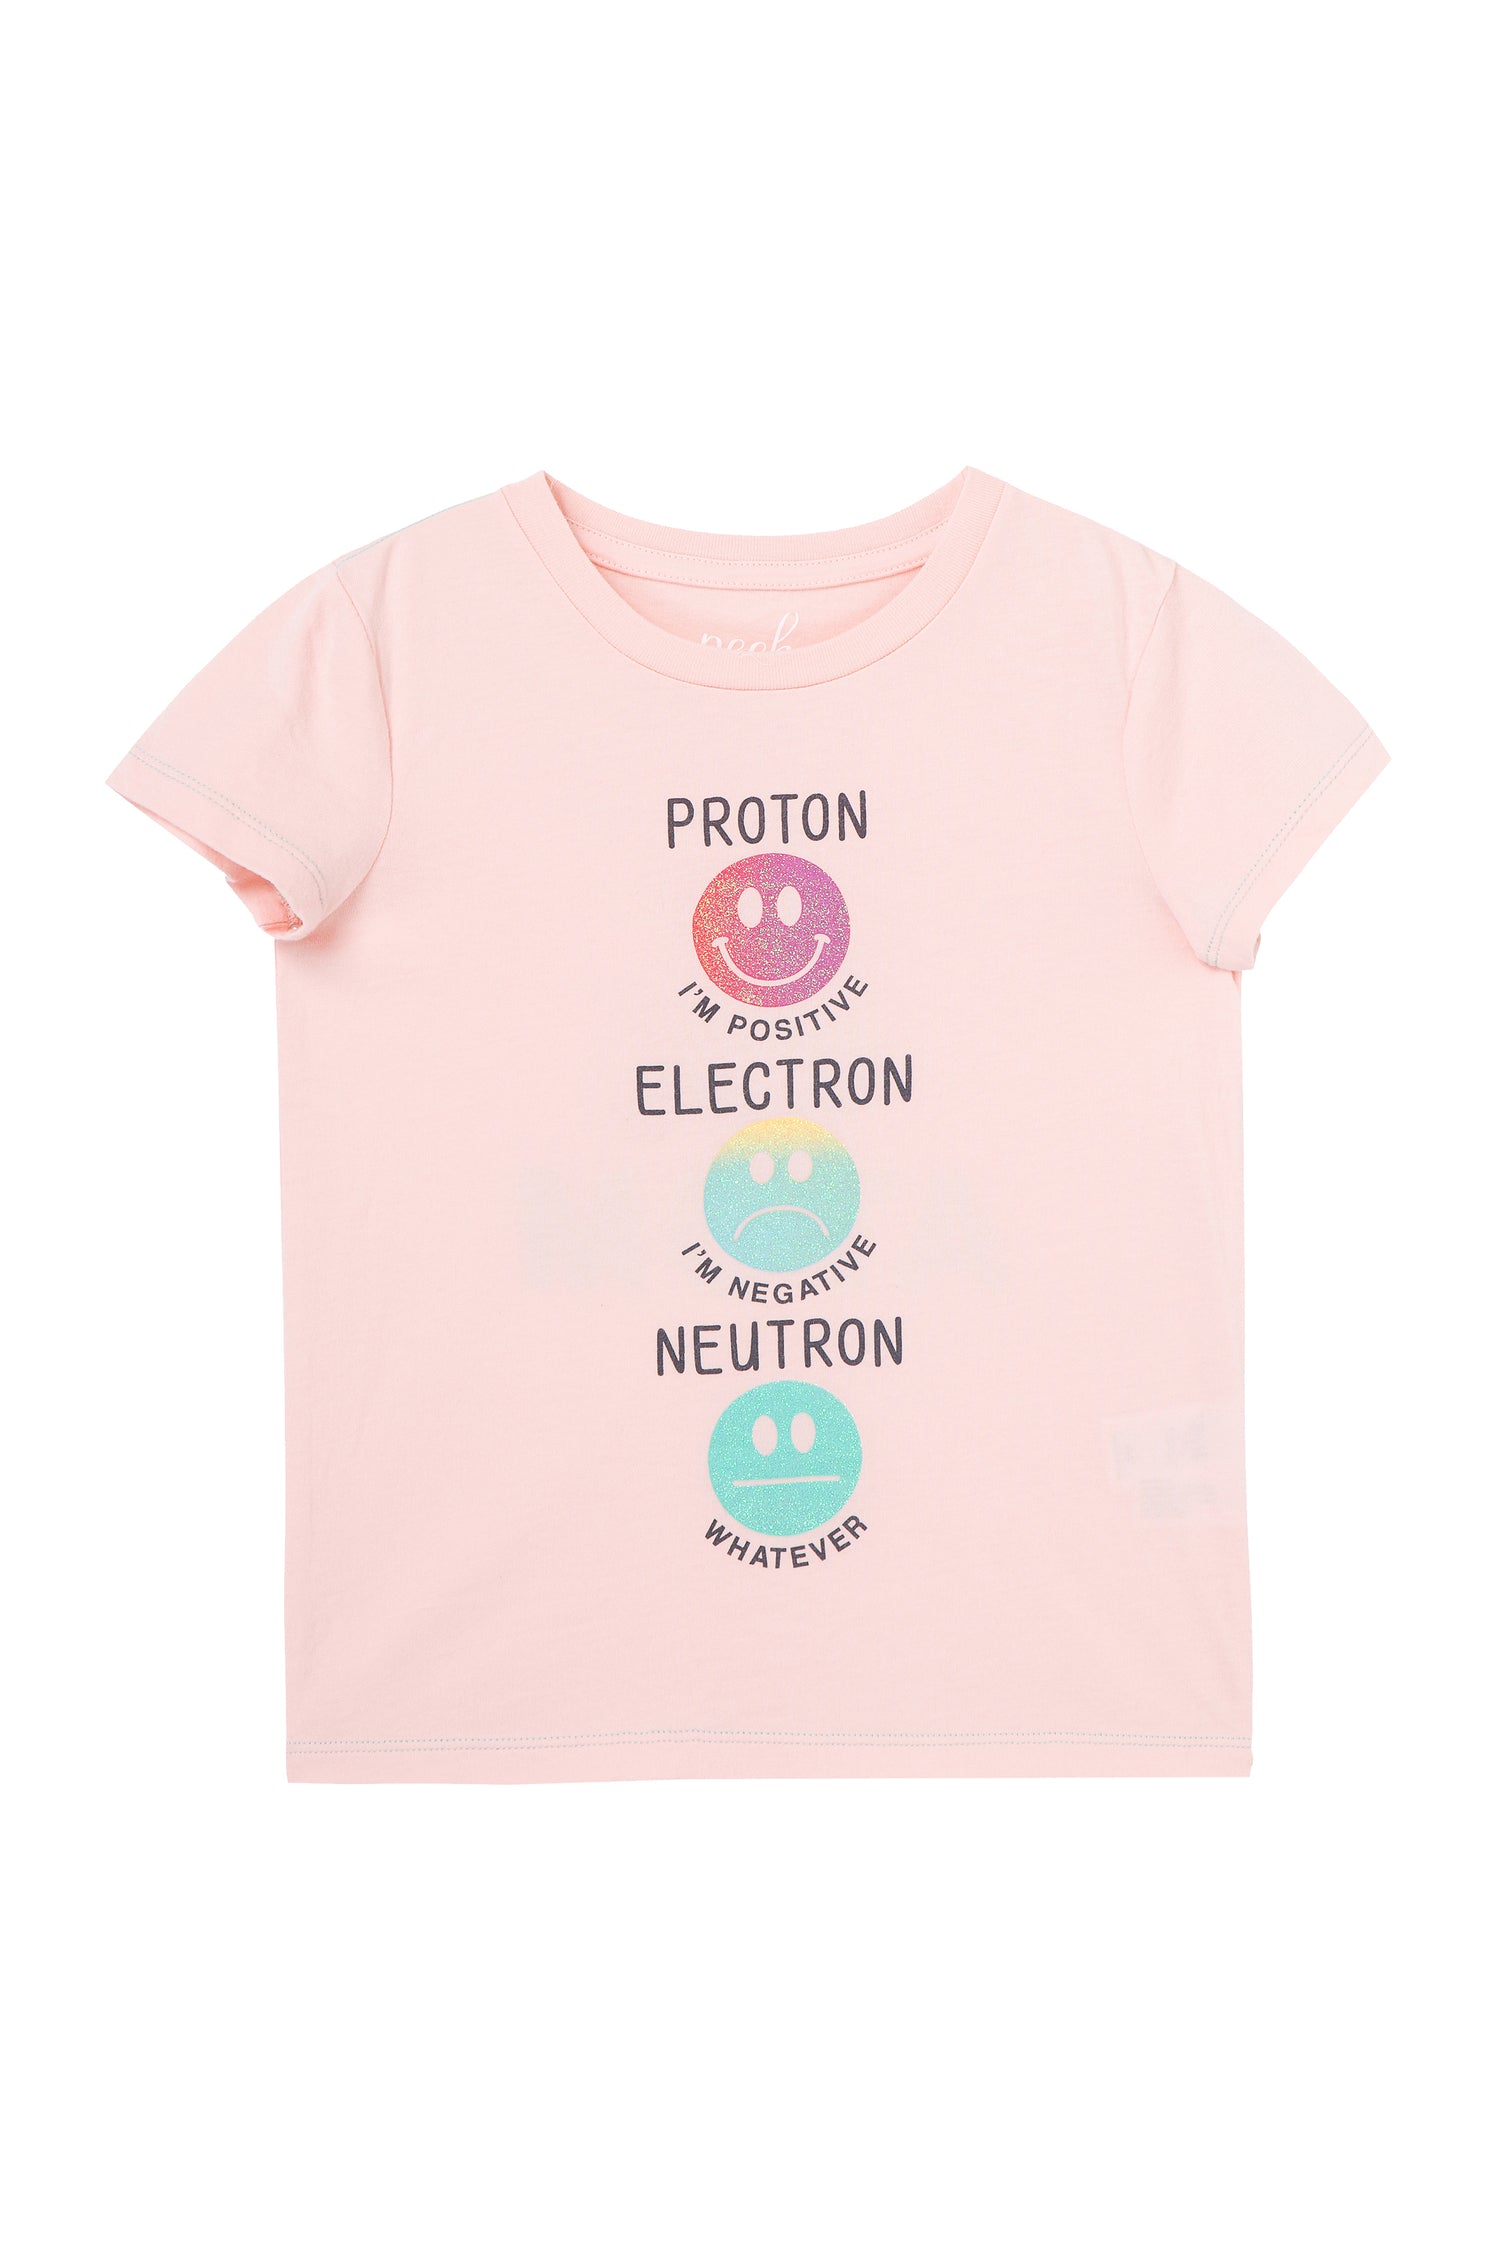 Front view of pink t-shirt with "Proton, electron, neutron" wording 